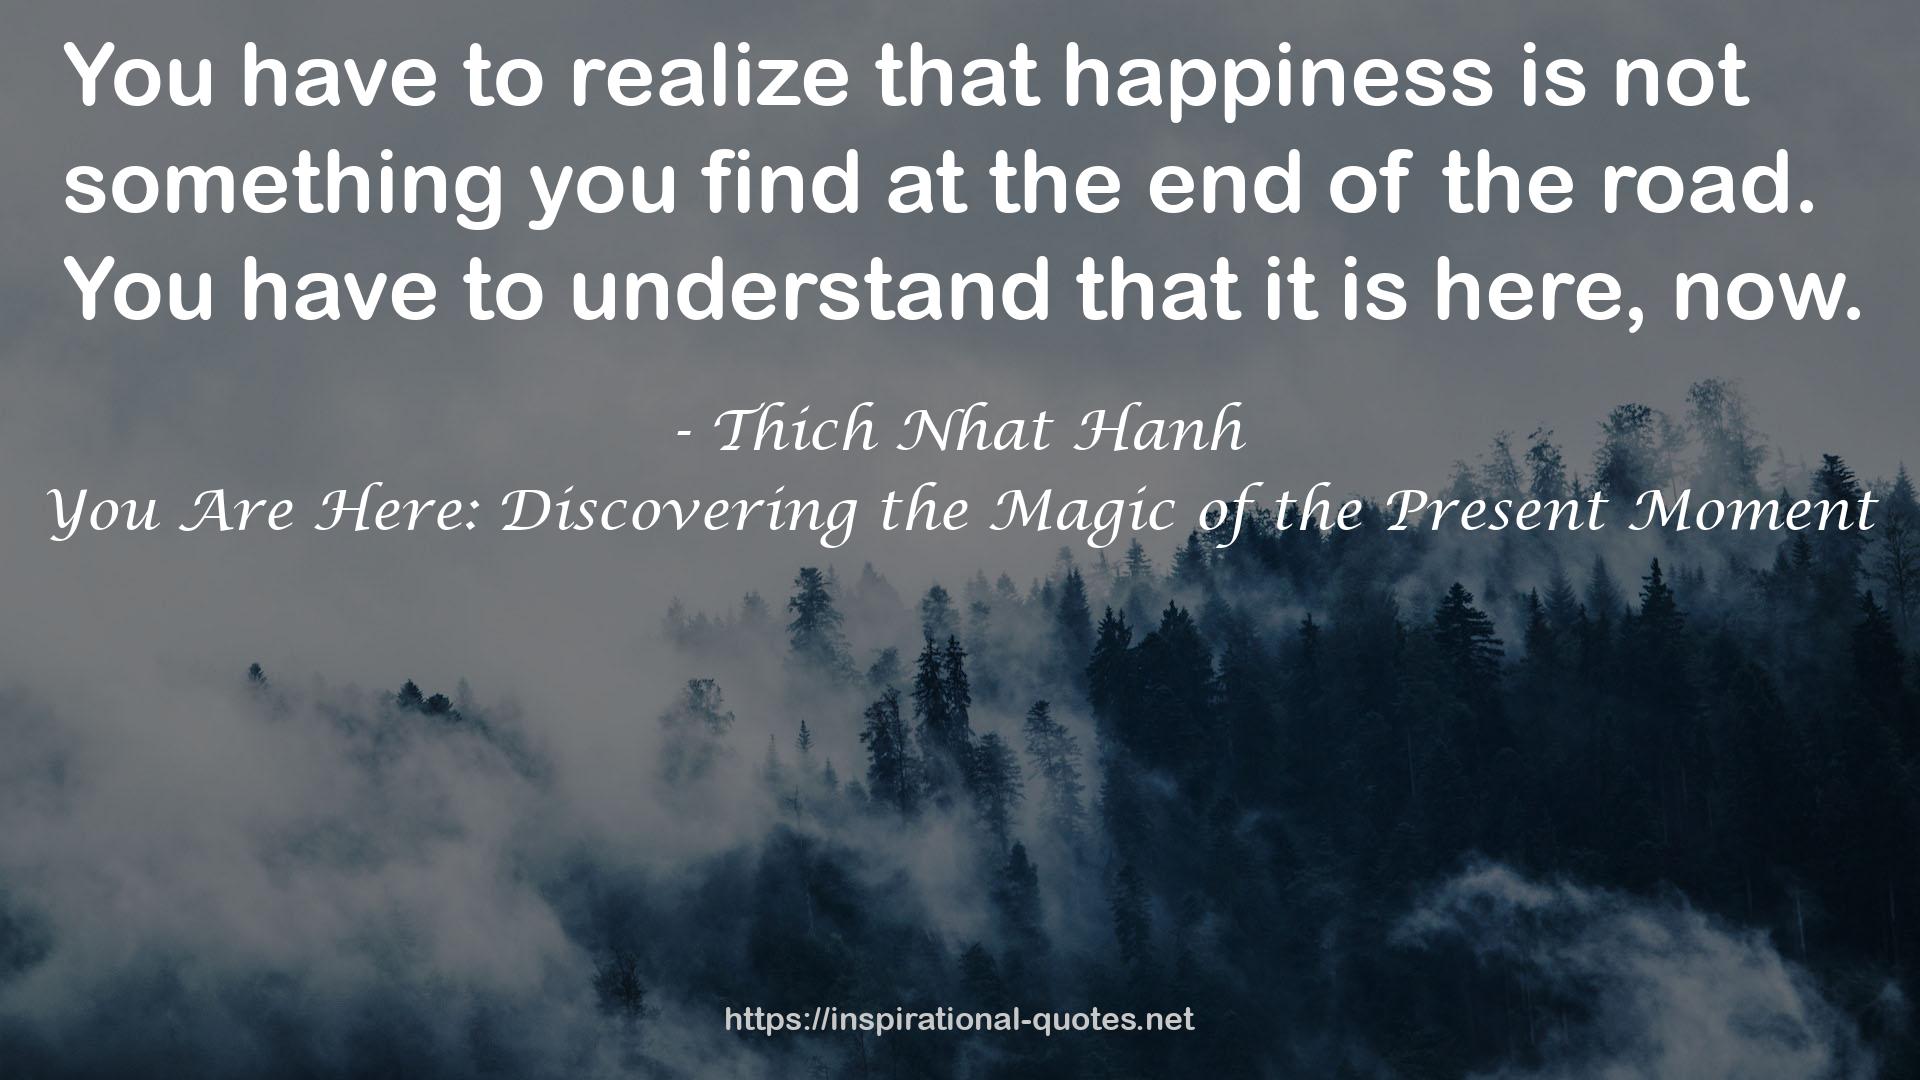 You Are Here: Discovering the Magic of the Present Moment QUOTES